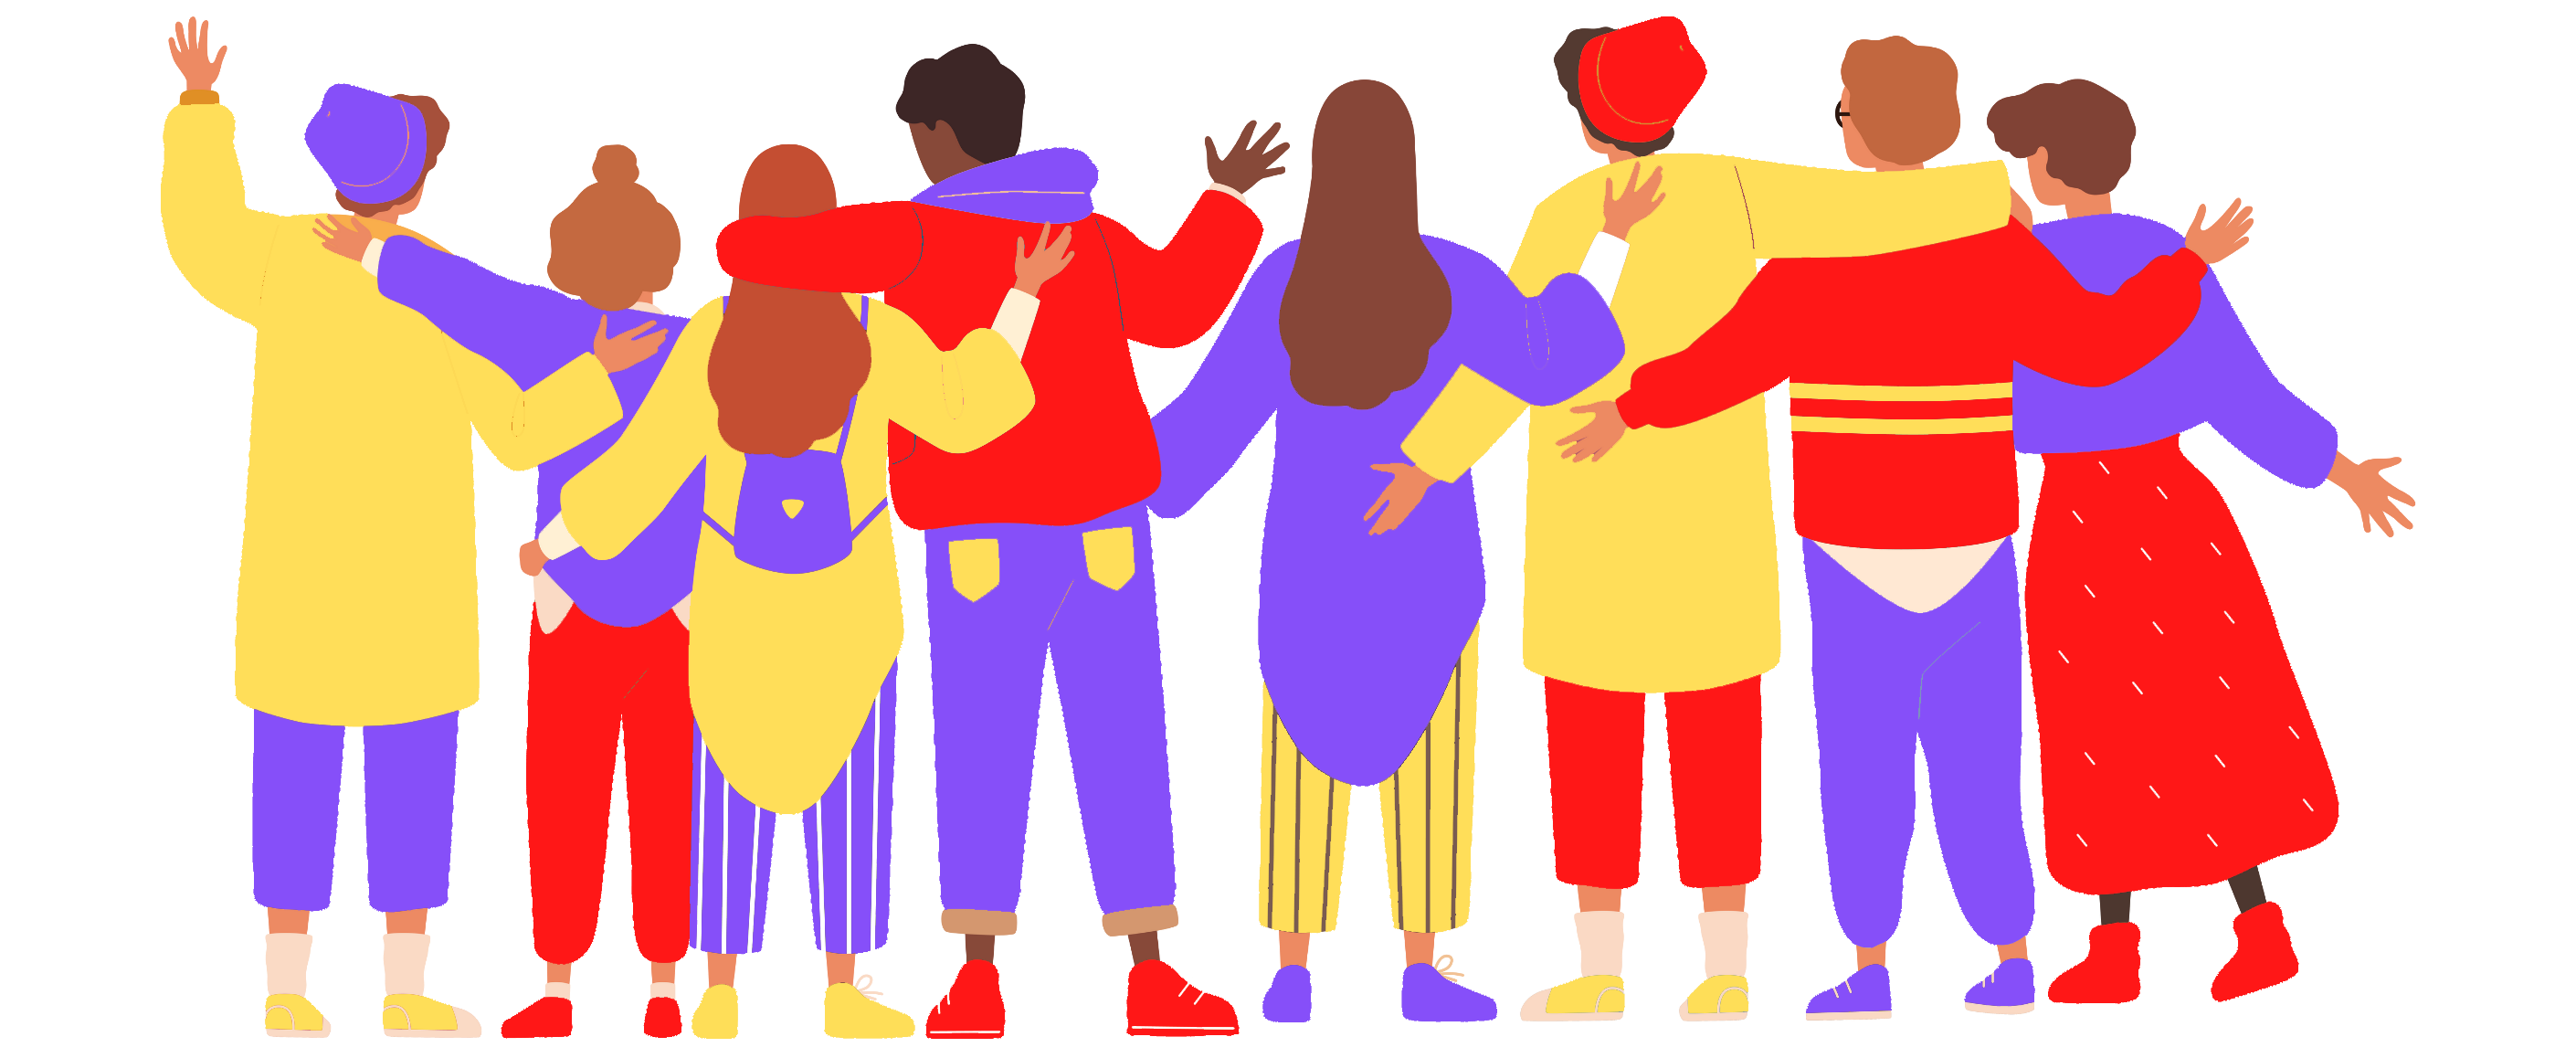 animation of young people from the back, hugging each other